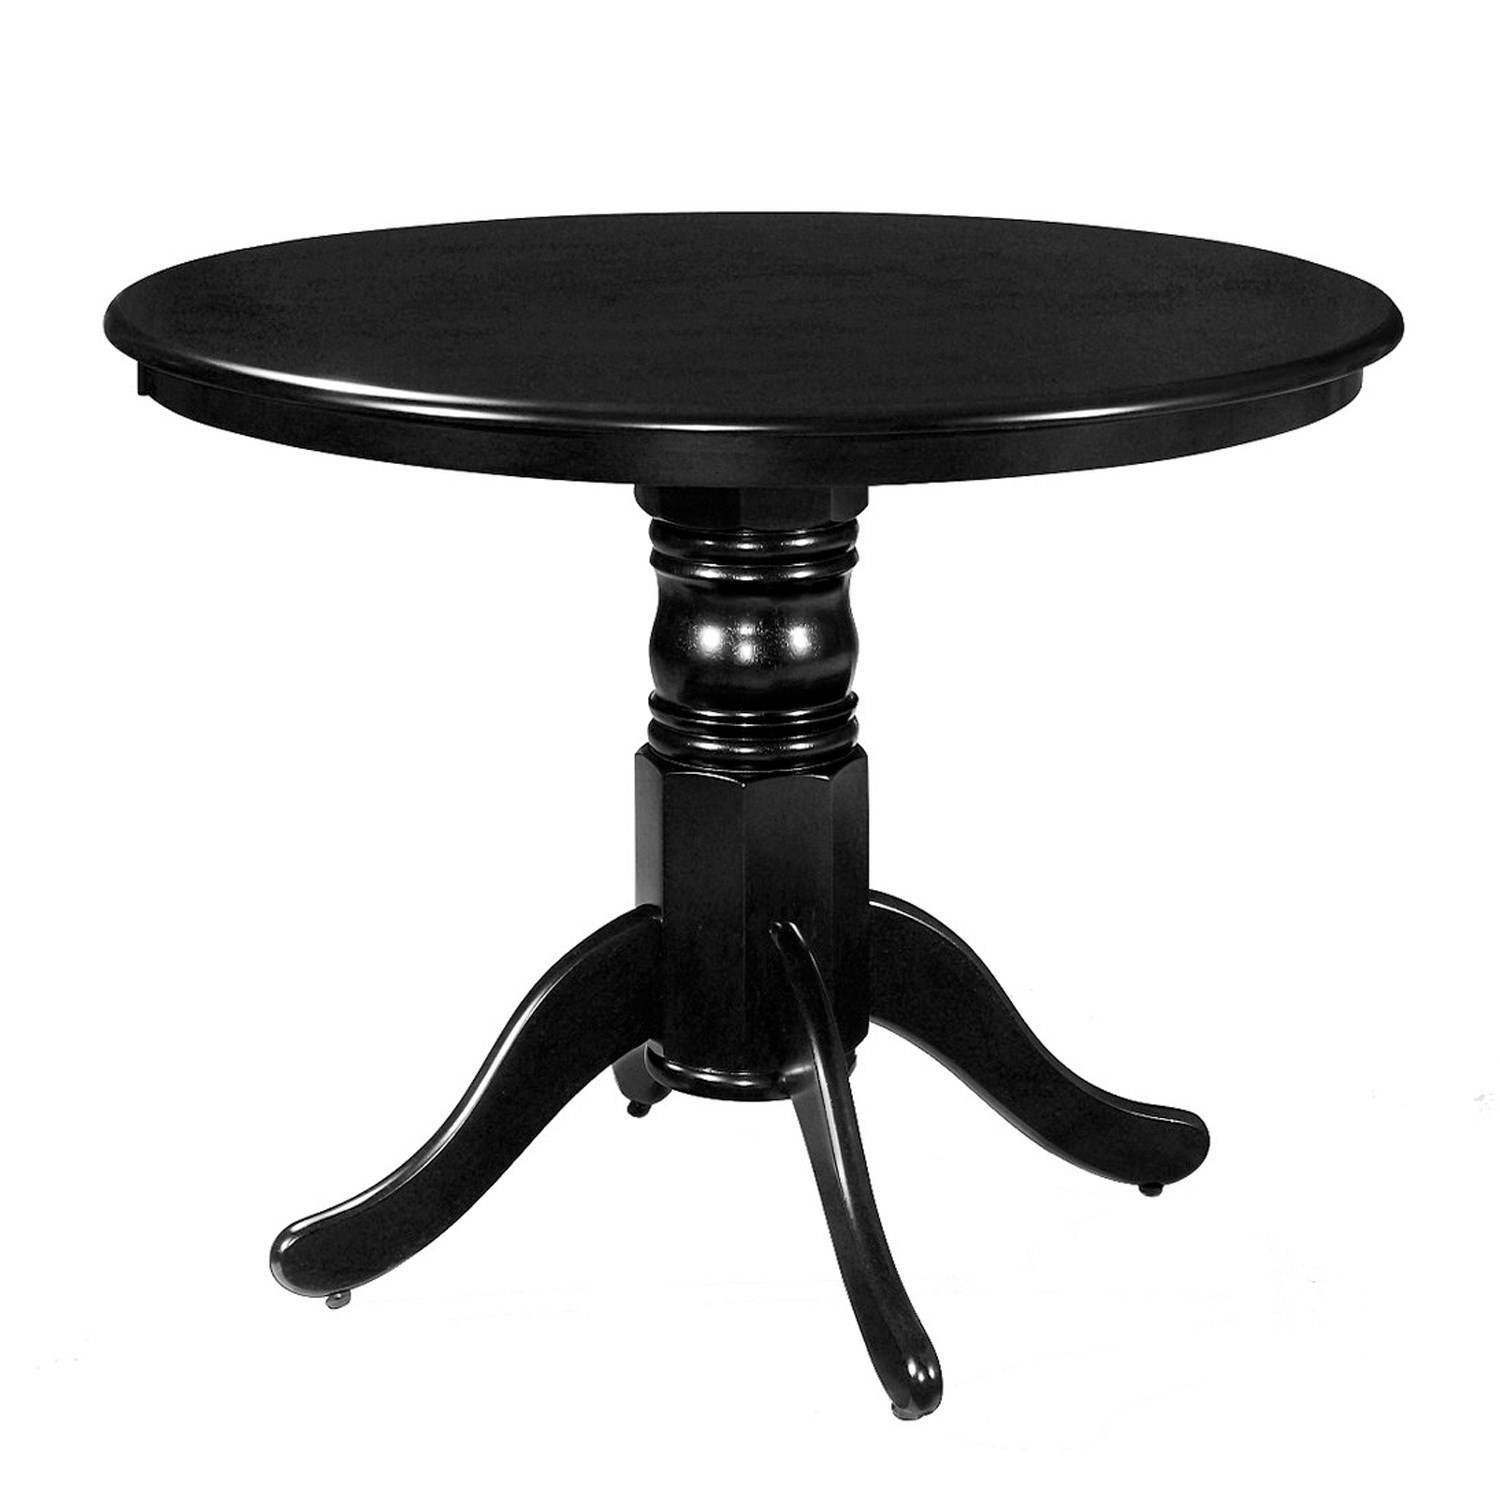 Small Round Dining Table In Black With, Small Round Black Table